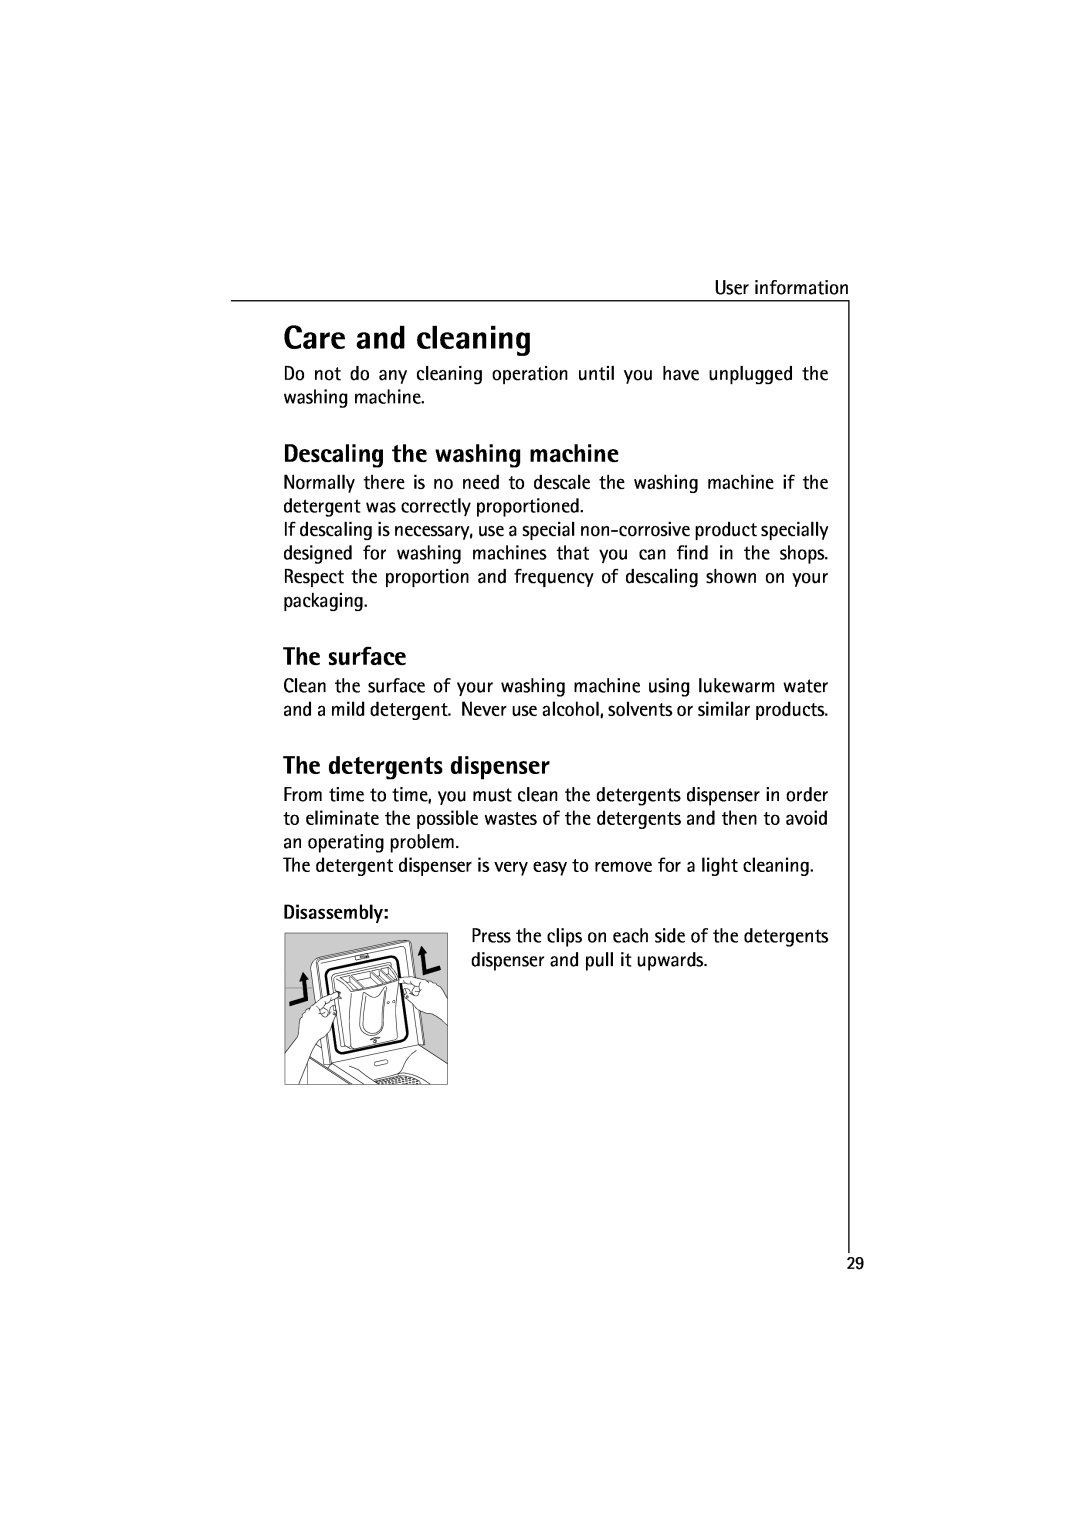 AEG 48380 manual Care and cleaning, Descaling the washing machine, The surface, The detergents dispenser, Disassembly 